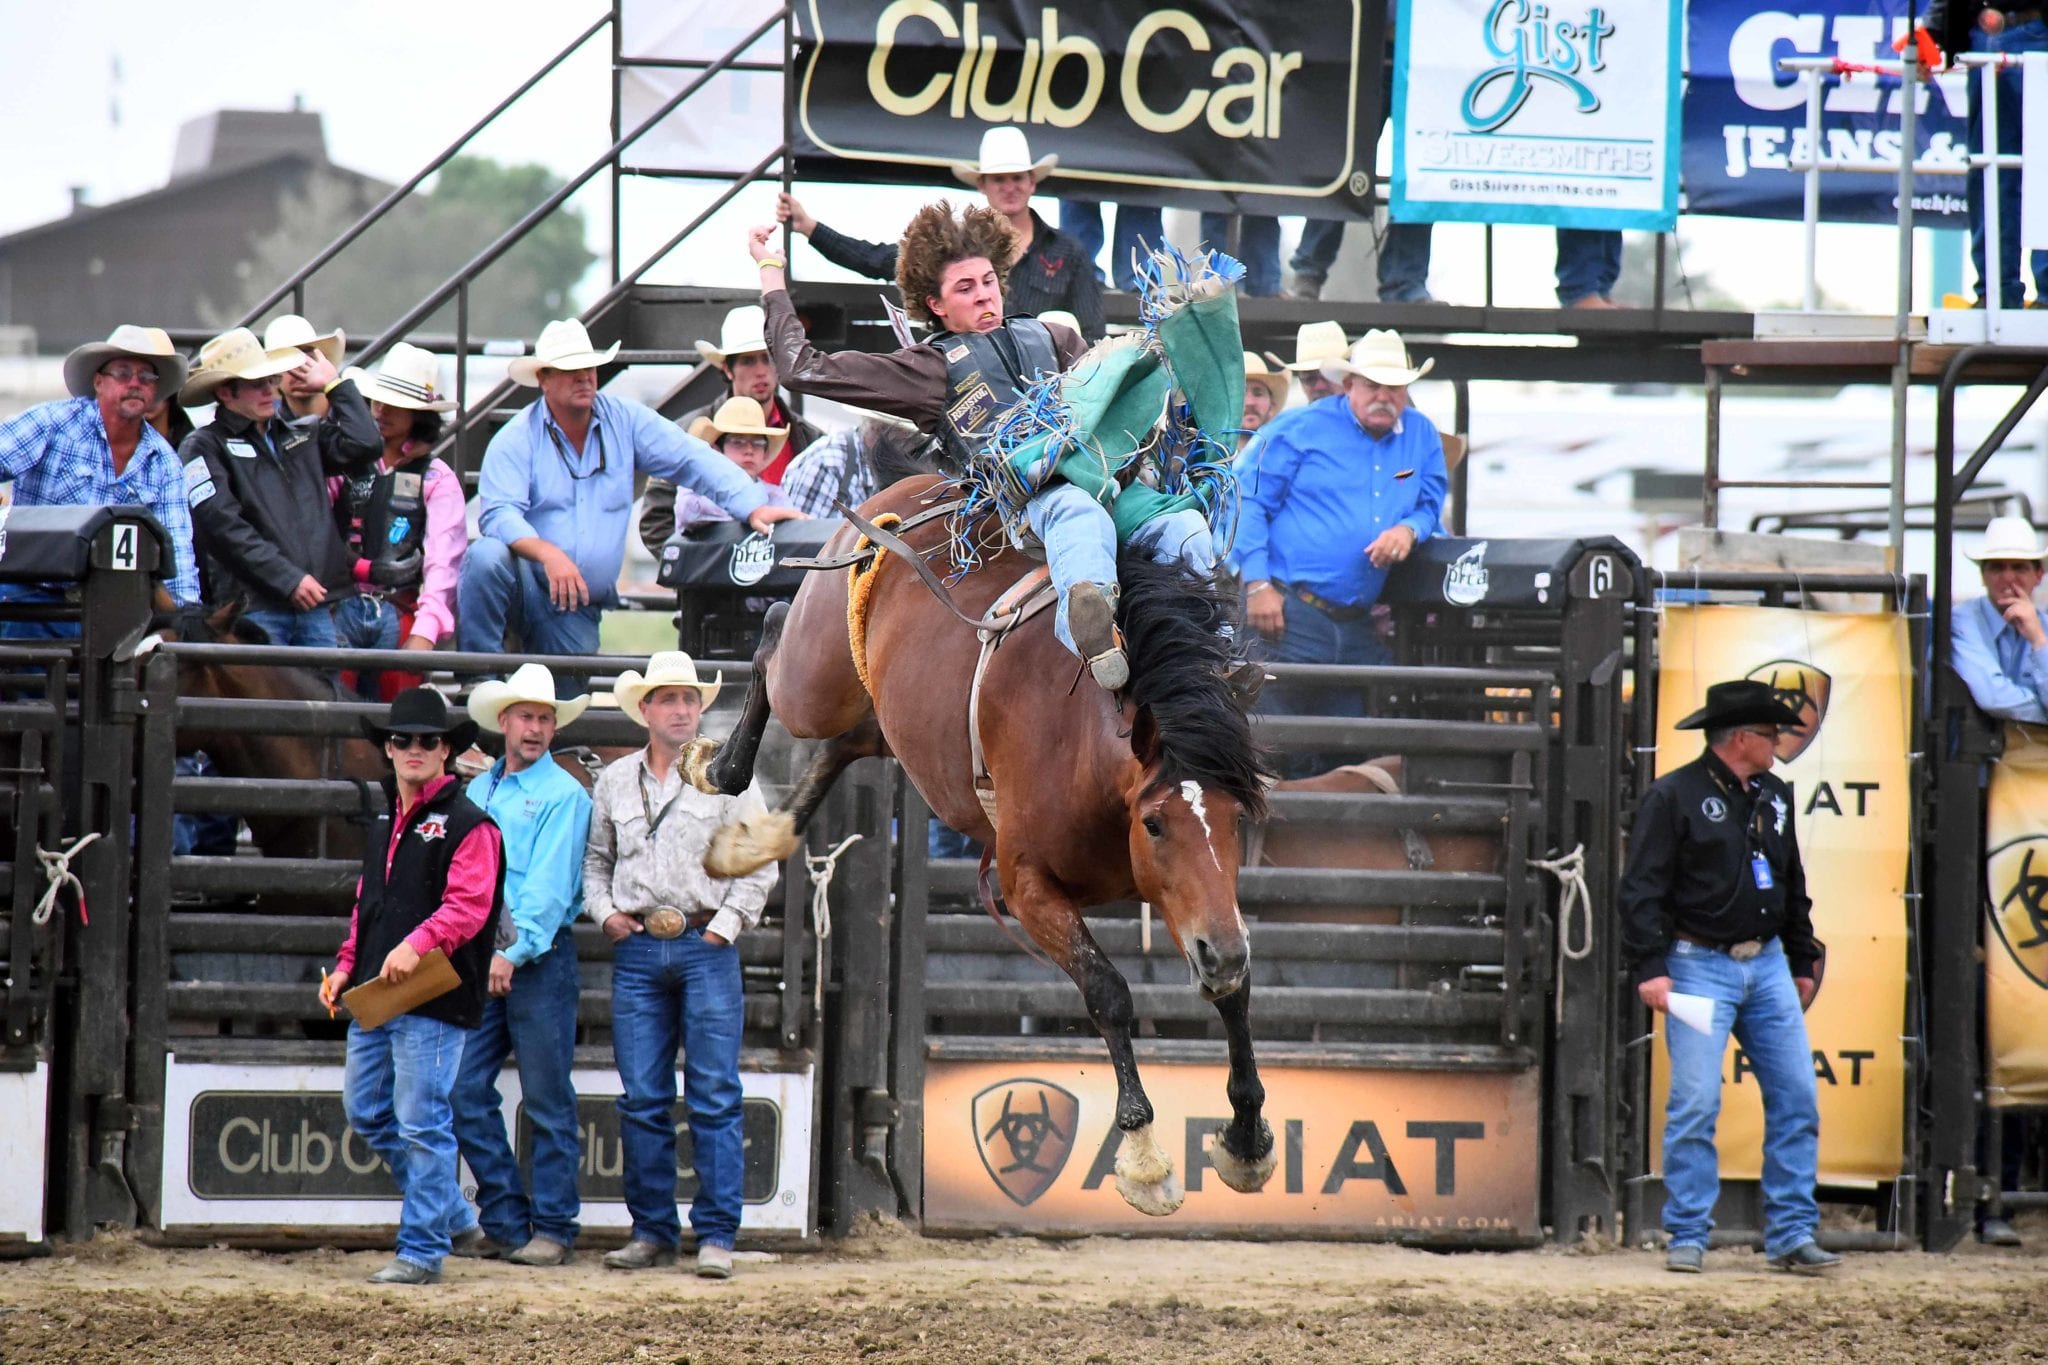 National High School Finals Rodeo, 7/147/20 Go Country Events